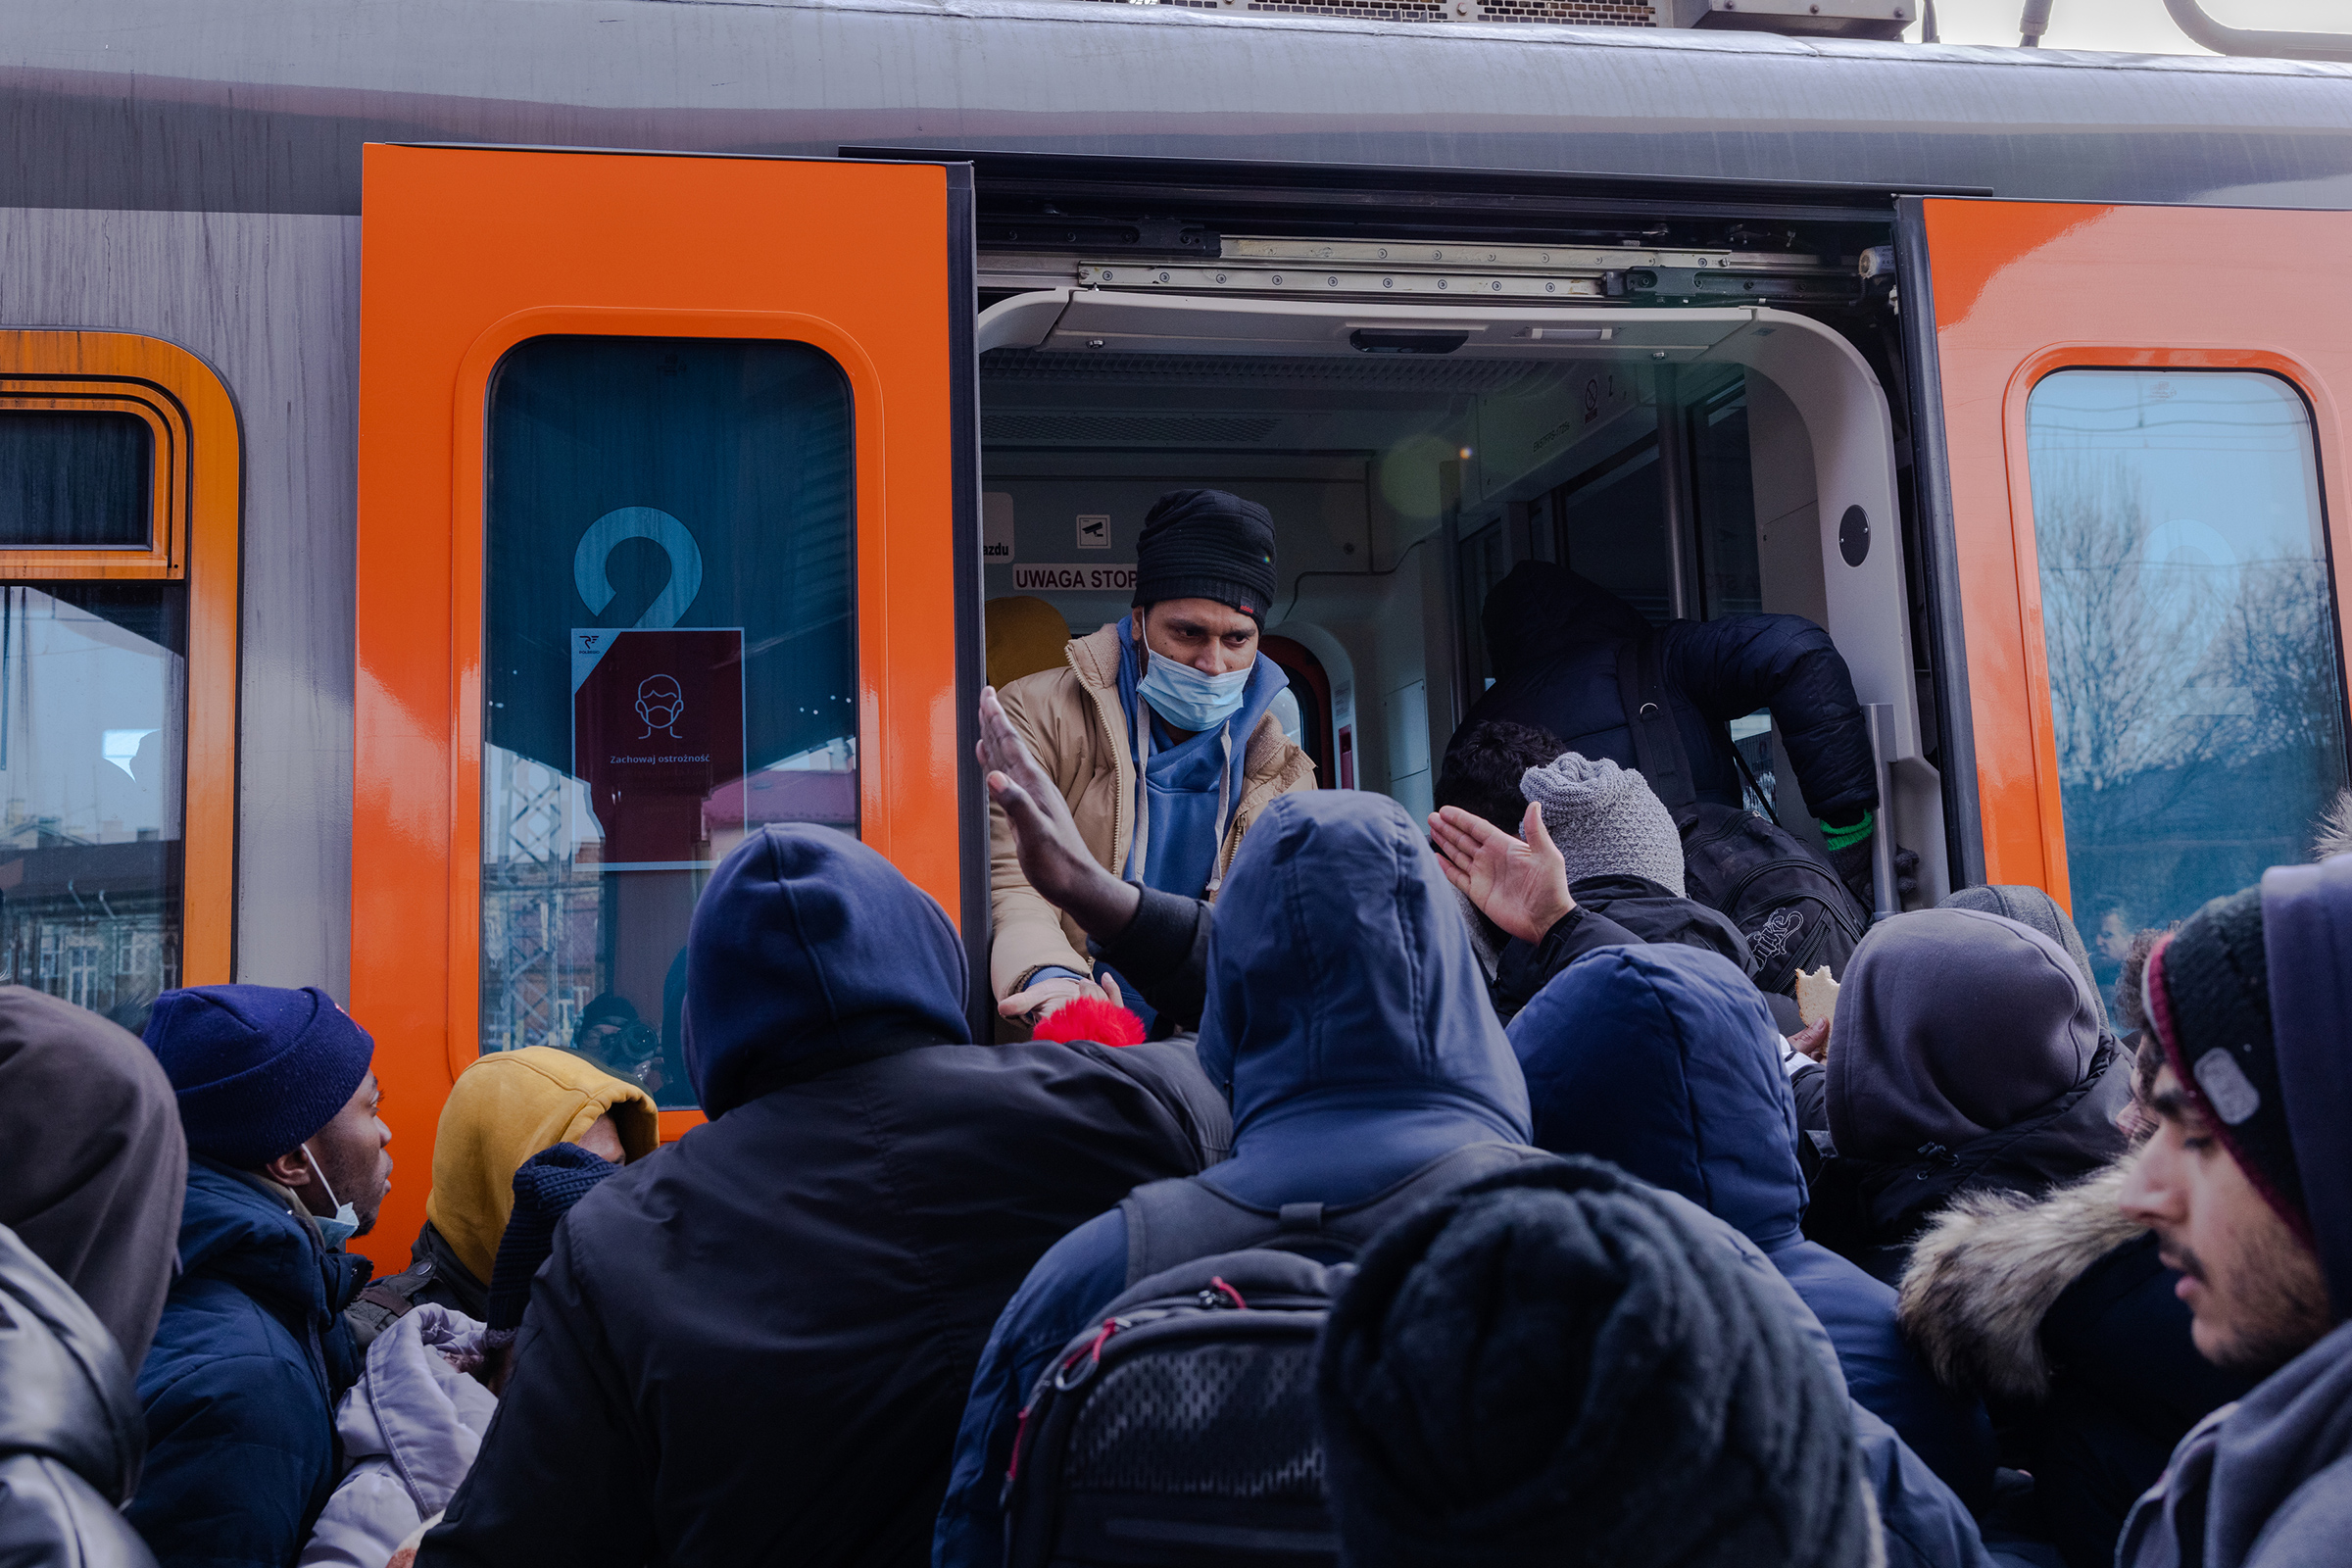 Refugees at the Przemysl train station attempt to board a crowded train to Krakow on March 1. (Natalie Keyssar for TIME)